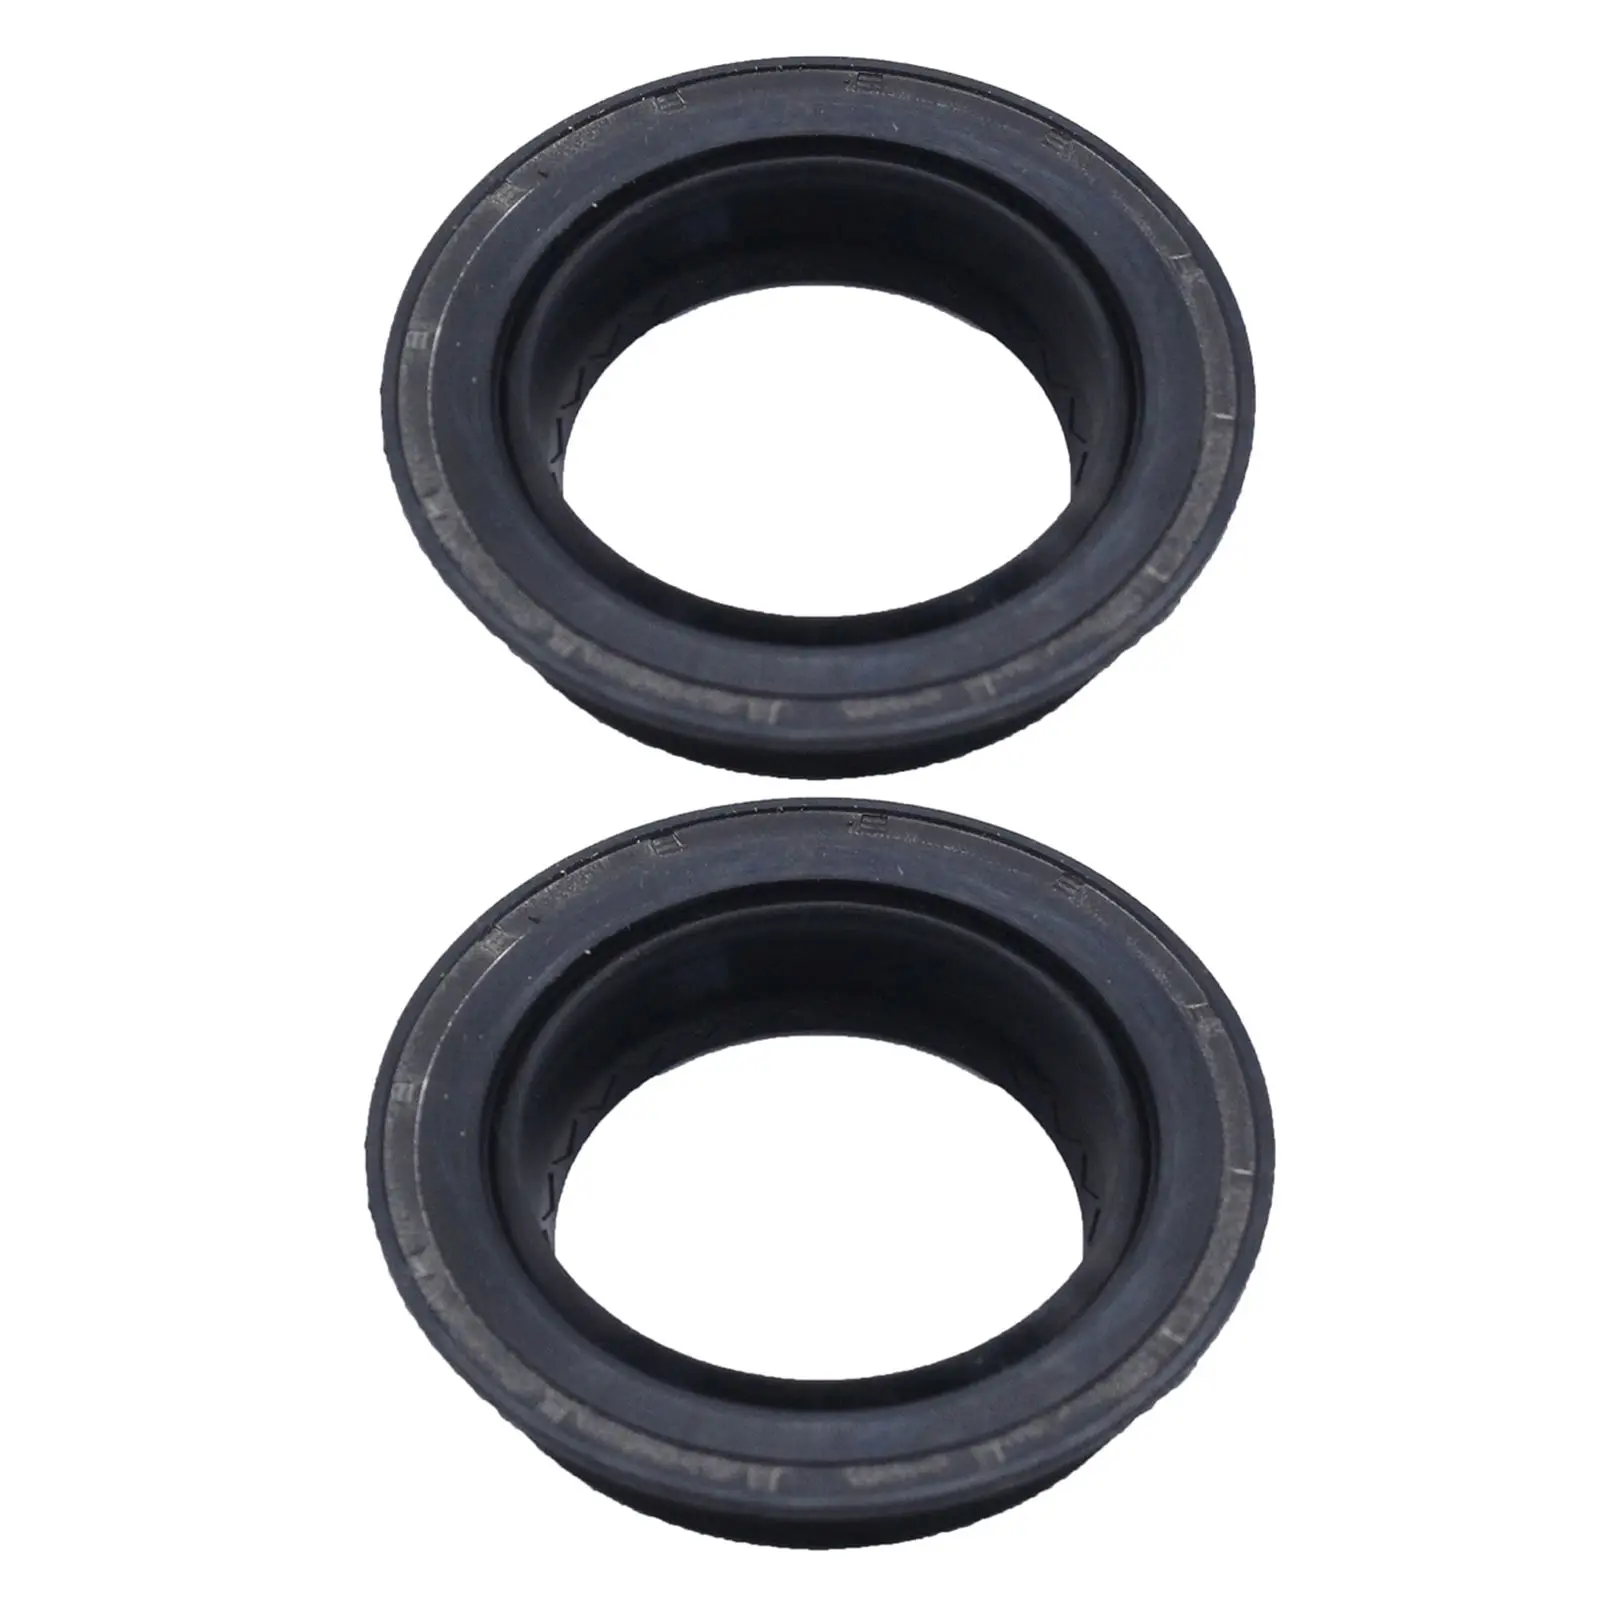 2 Pieces 303752-KIT 40533-01J00 Trail Safe Front Axle Seal Oil Seal Kit Vehicle Mount Kit Supplies Fit for Patrol Y60 Y61